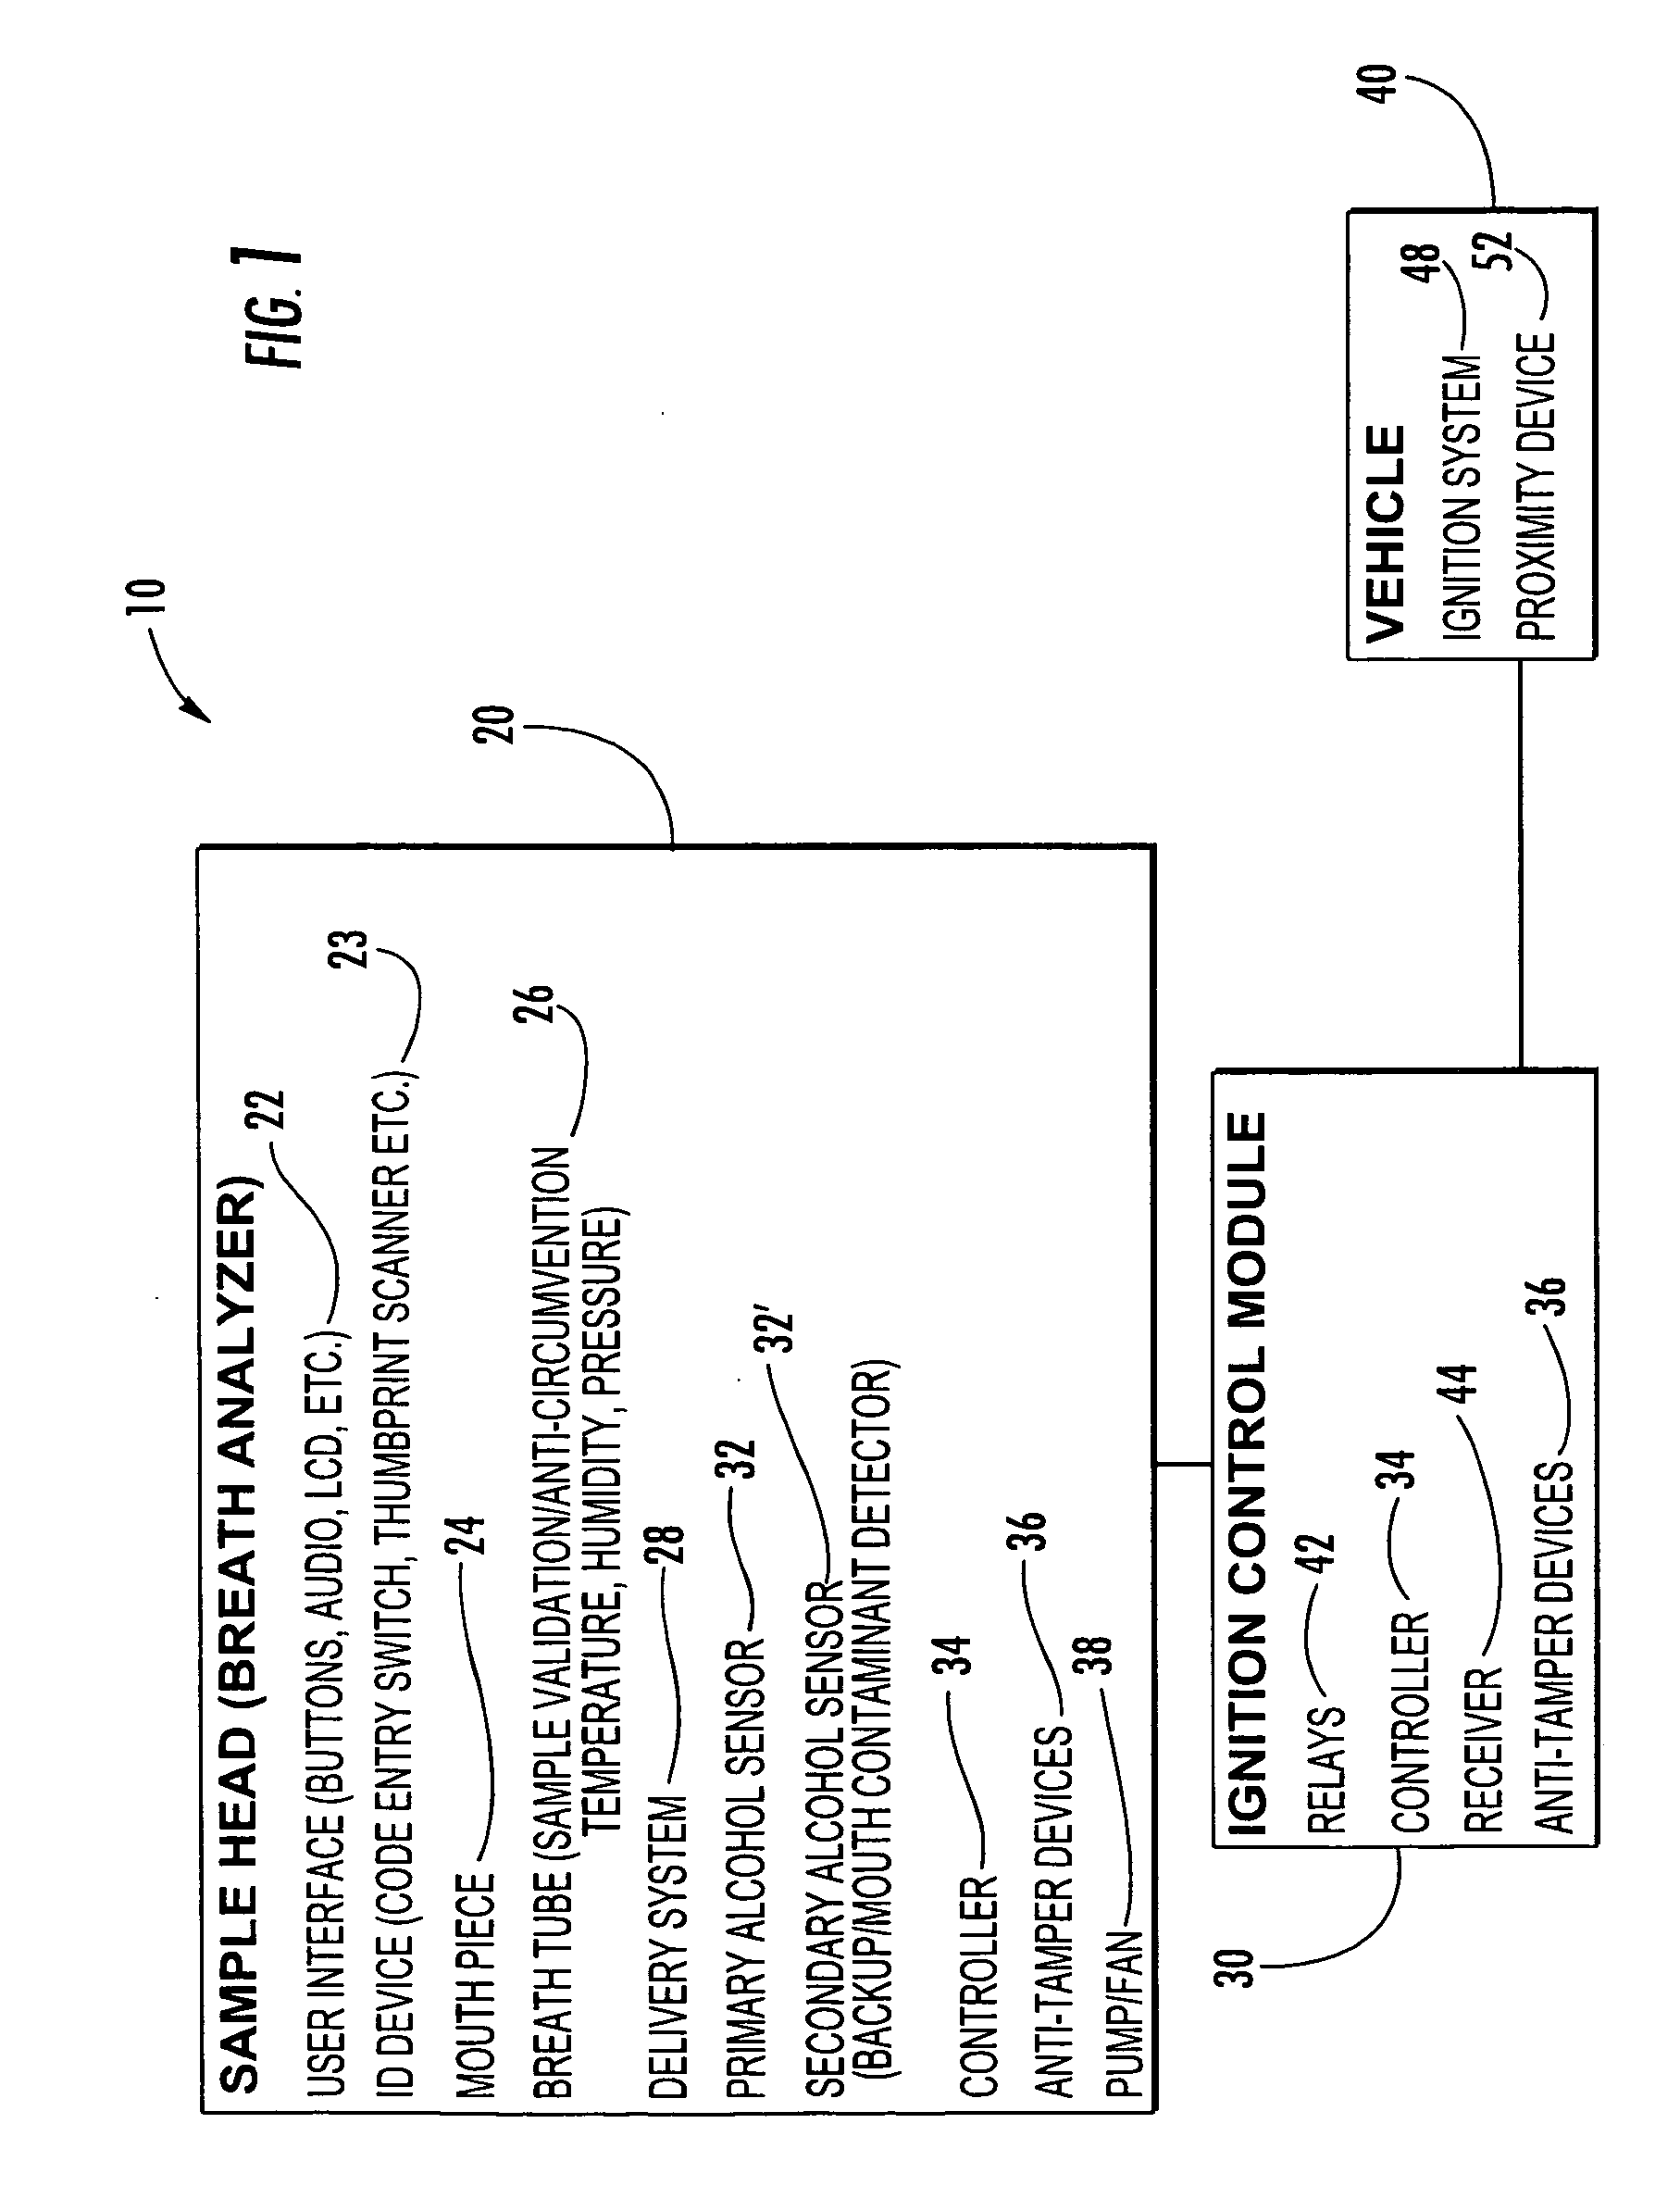 Vehicle ignition interlock systems with mouth alcohol contamination sensor